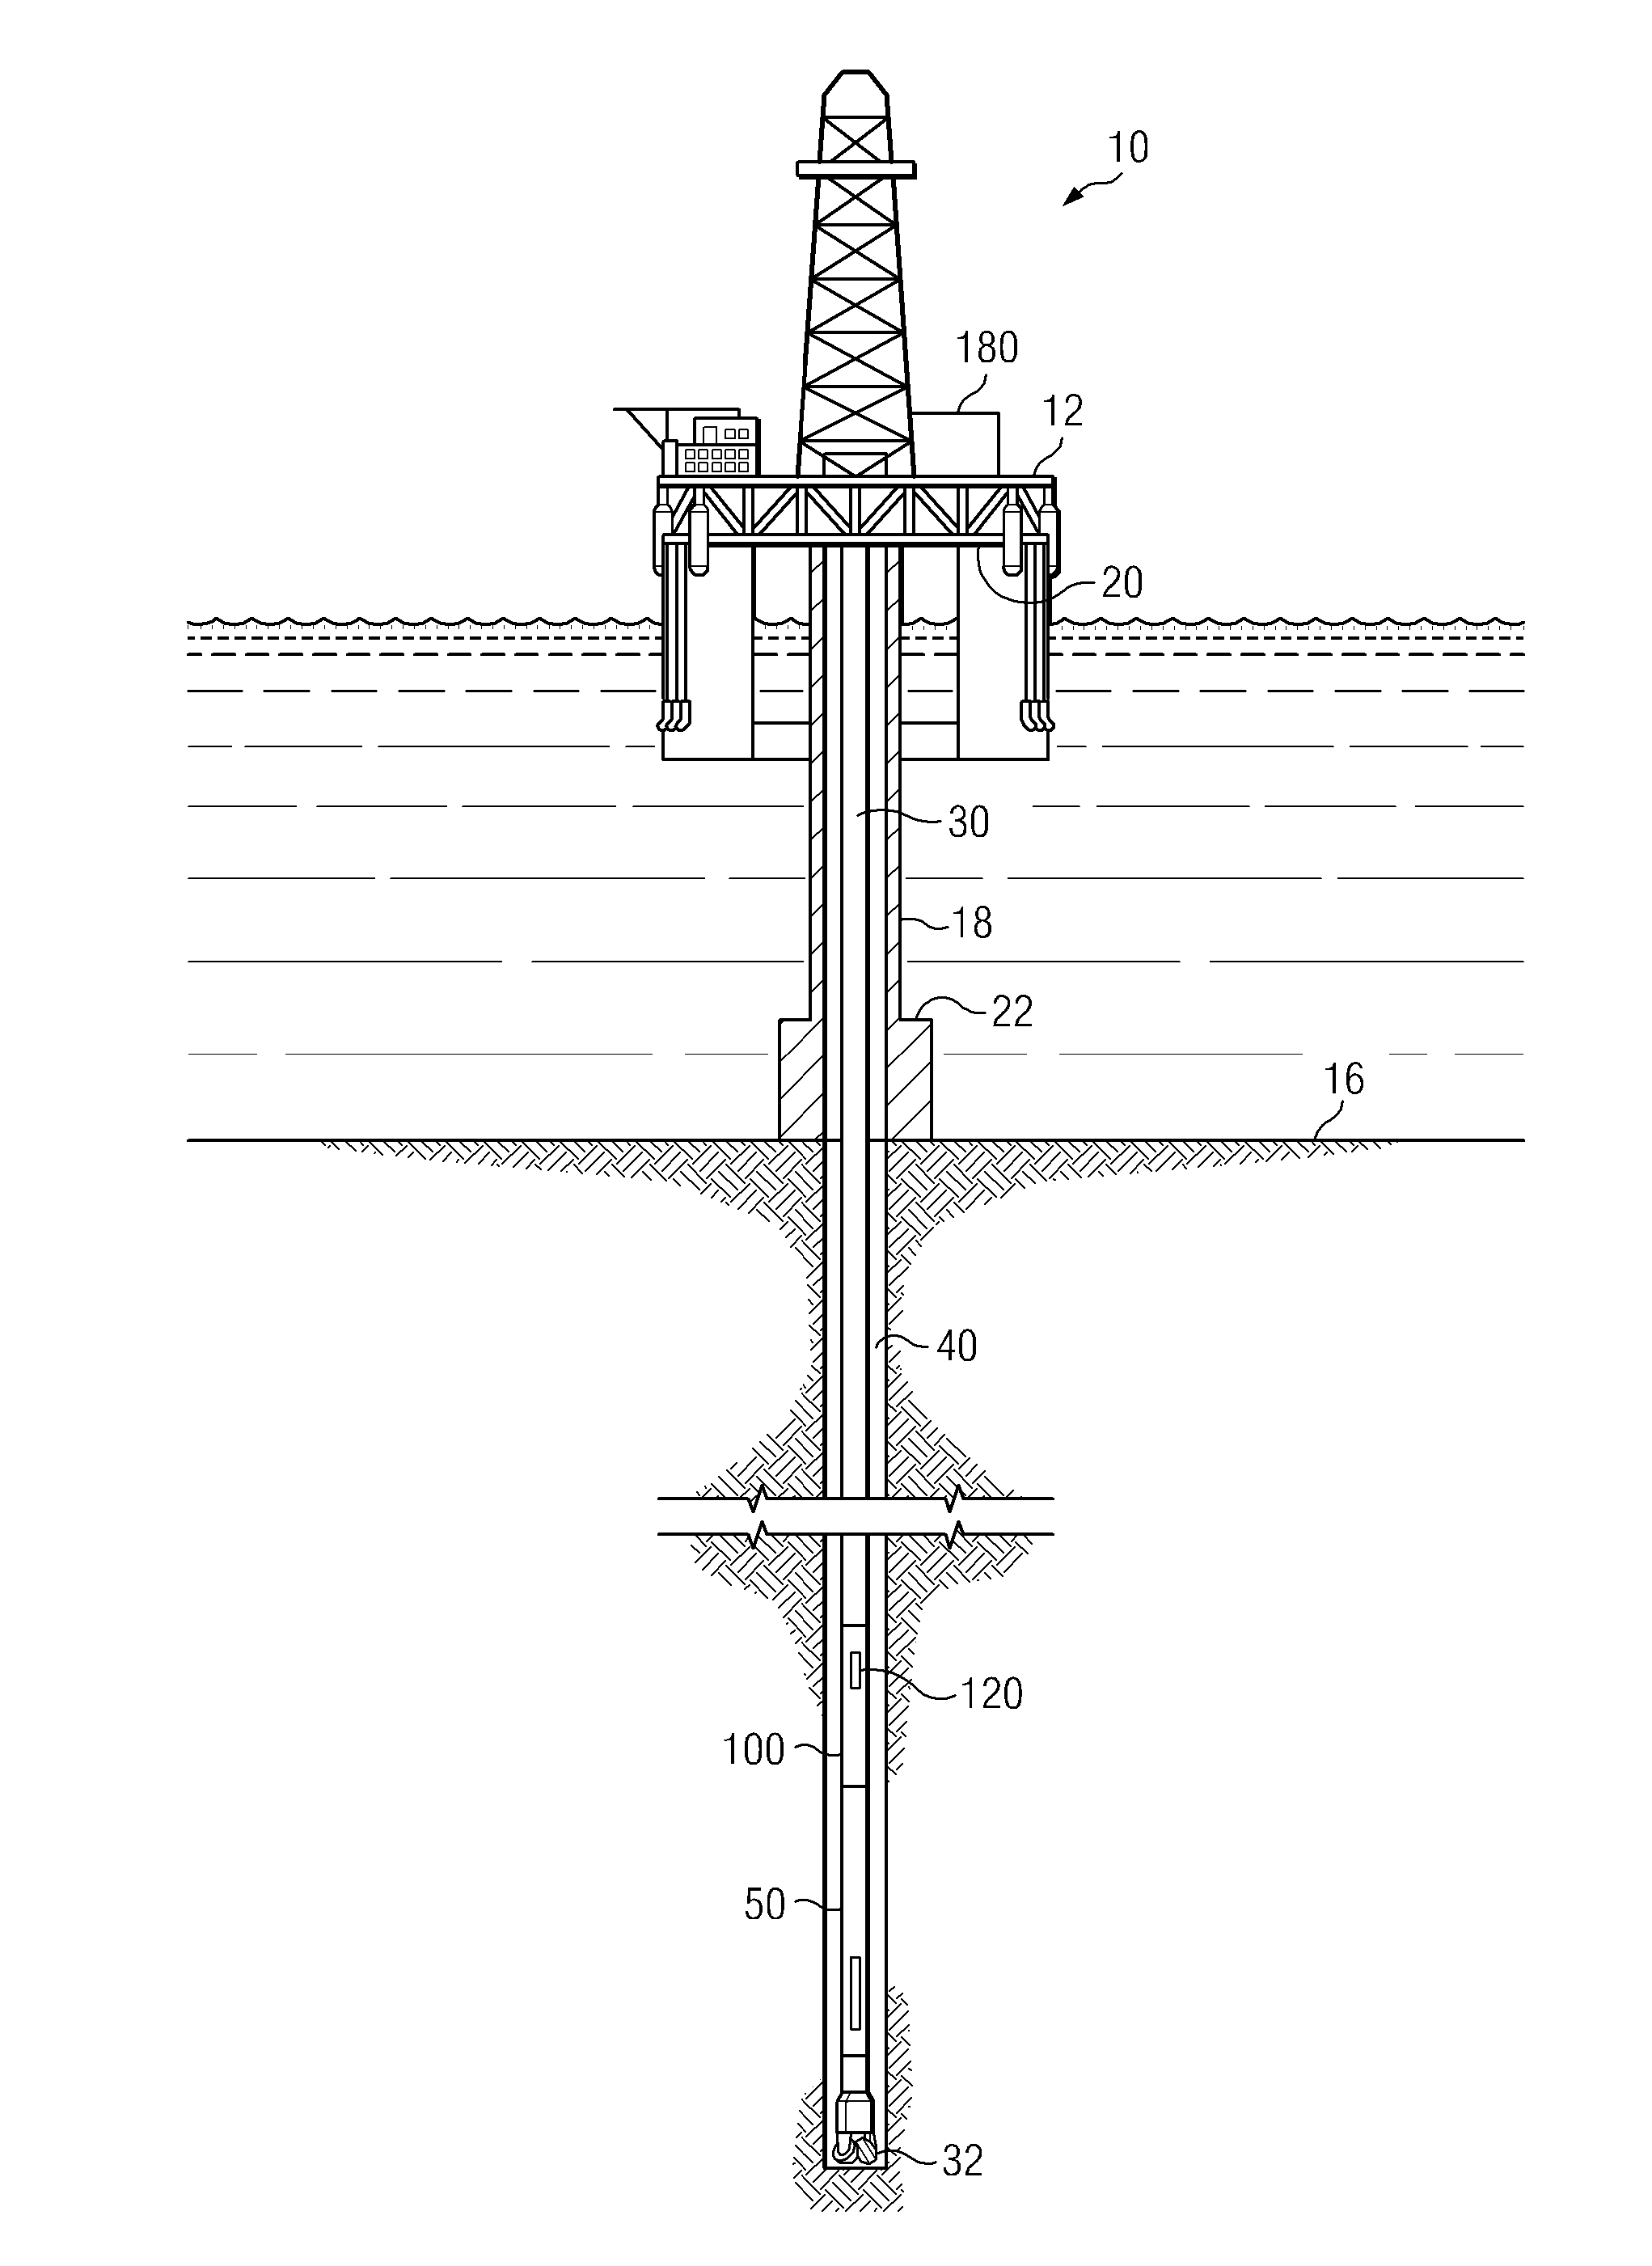 Downlinking Communication System and Method